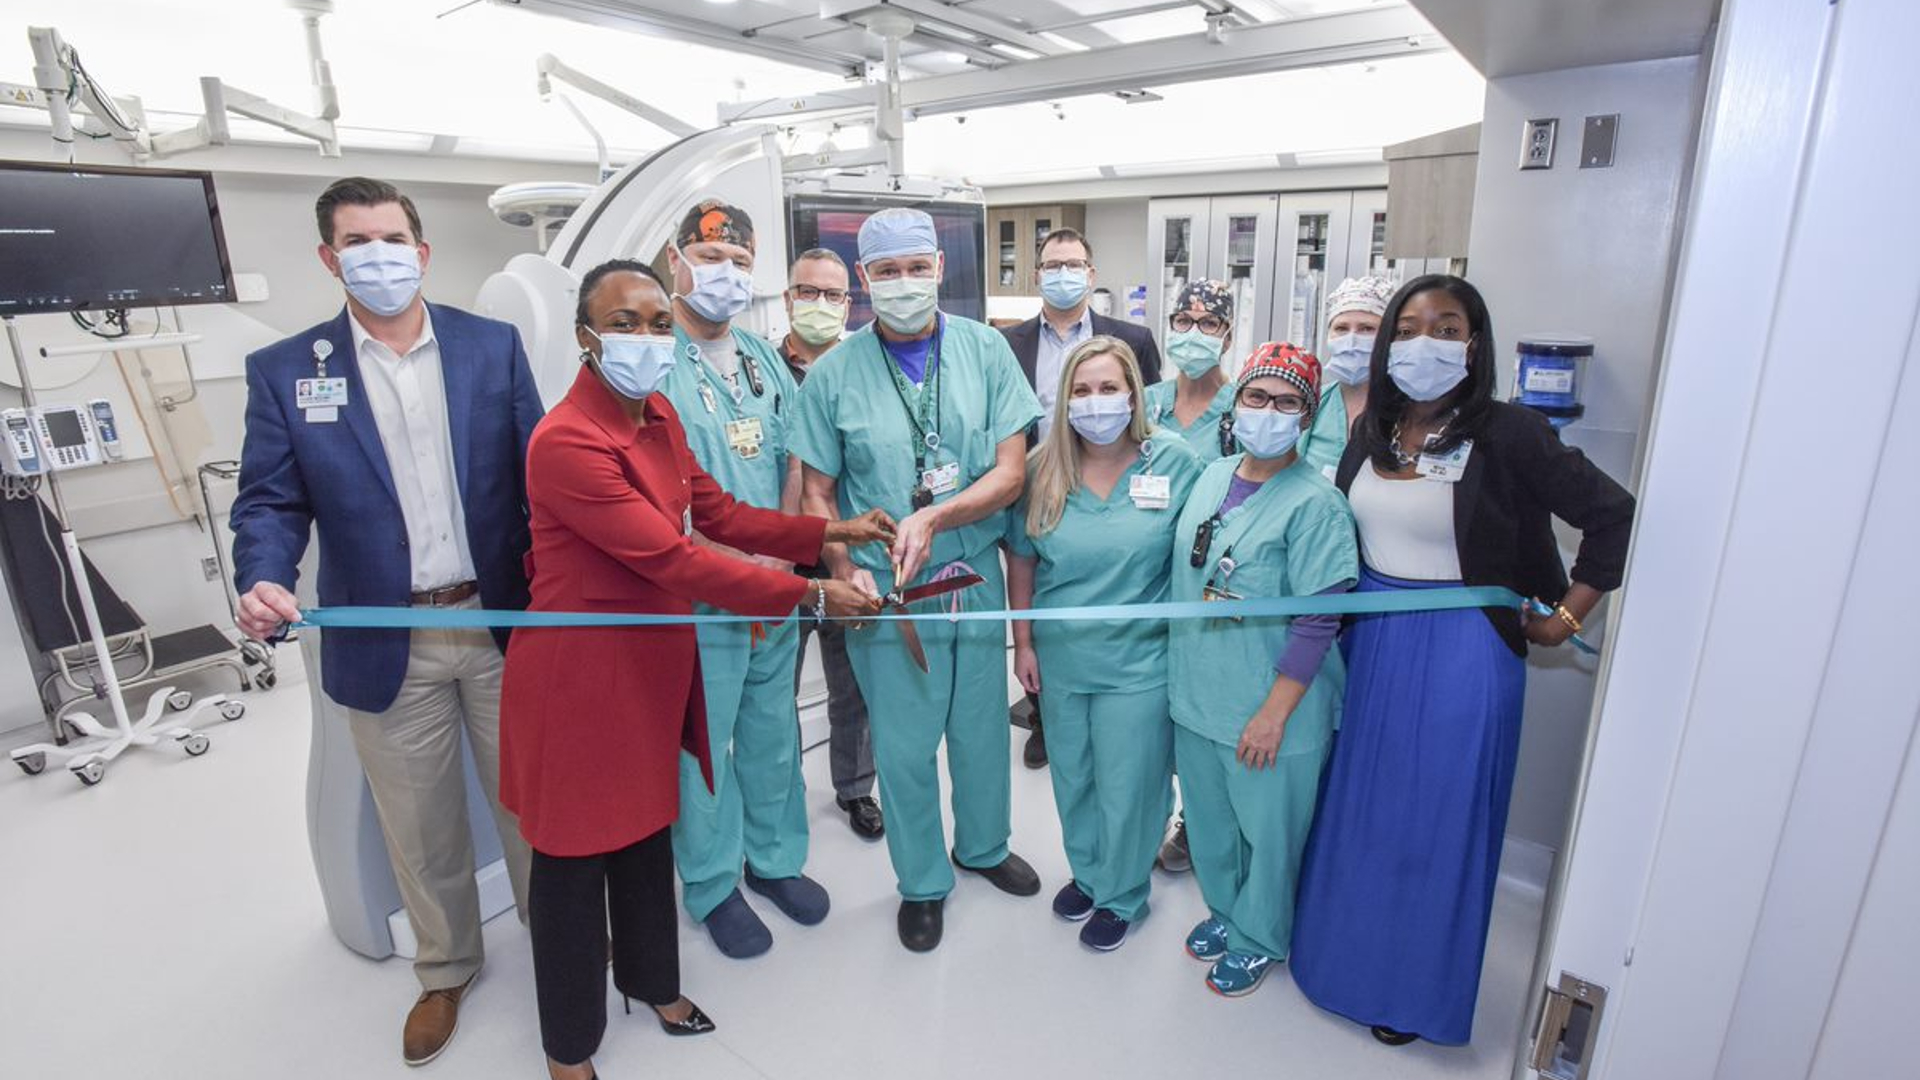 A newly renovated vascular lab opened November 10 at Atrium Health Sanger Heart & Vascular Institute. Learn about the world class, upgraded technology and how it aims to improve outcomes in patient evaluation, treatment, and surgery. 